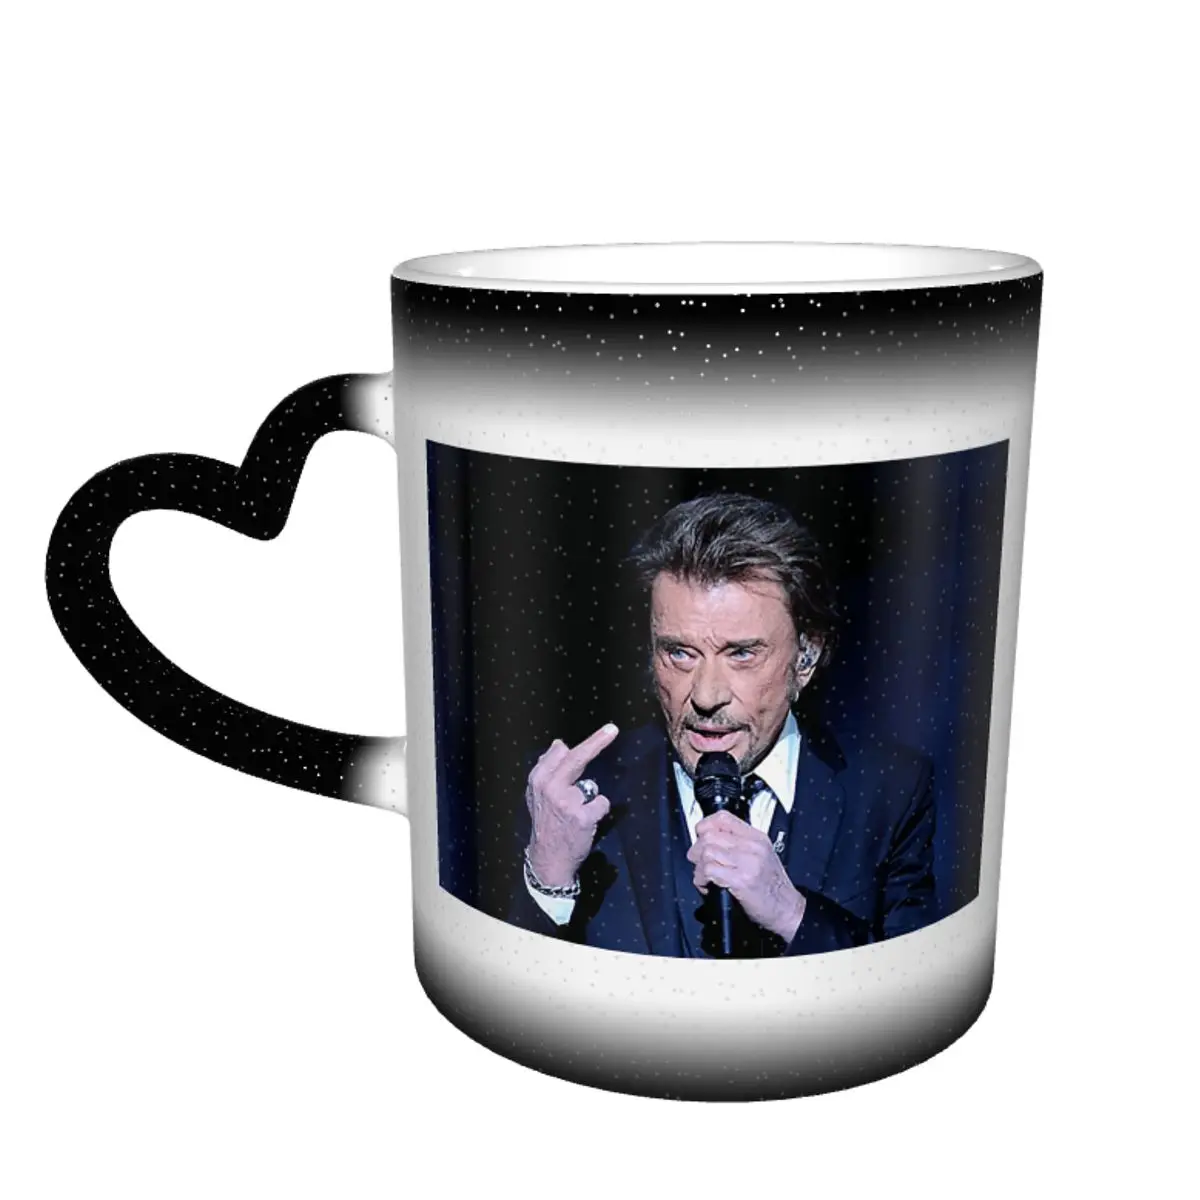 

Color Changing Mug in the Sky Johnny And Hallyday Mort B Graphic R337 Ceramic Heat-sensitive Cup Humor Graphic Tea cups